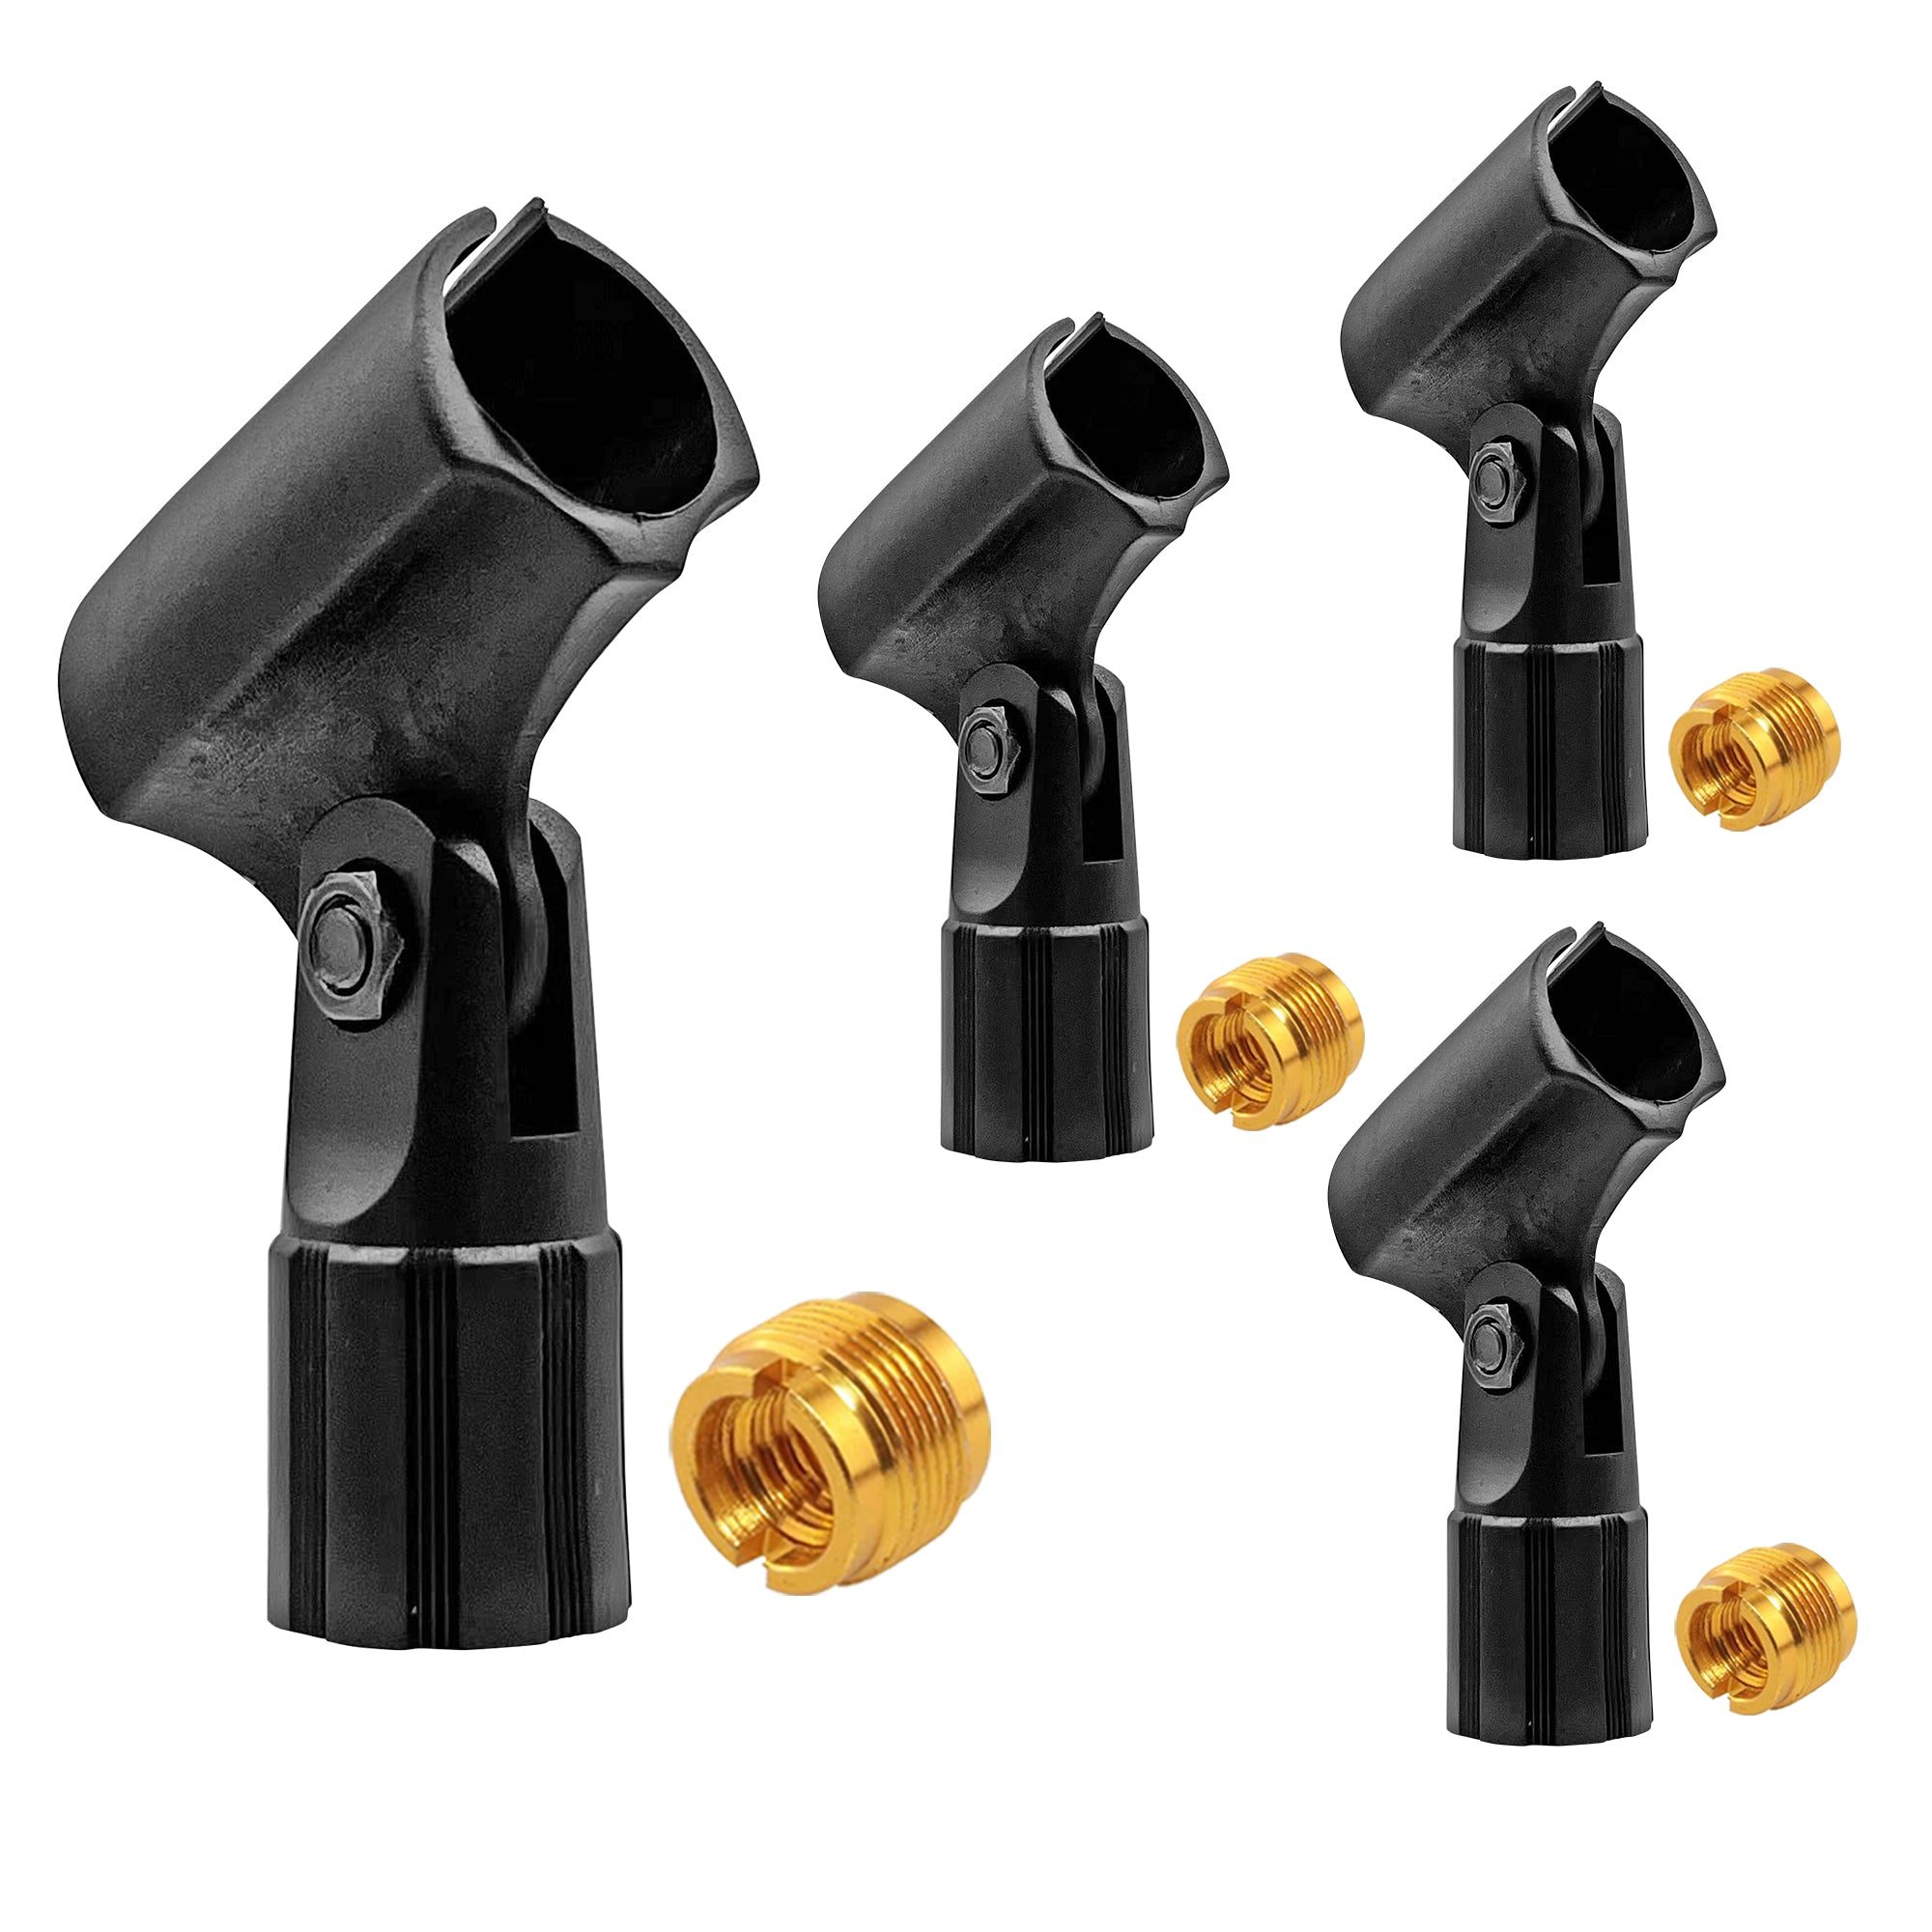 5 Core Pencil Microphone Clip Holder Black Angle Adjustable Slim Condenser Mic Adapter with Universal 5/8" Male to 3/8" Female Adapter Skinny Microphone Clips 4Pcs -MC 08 4PCS